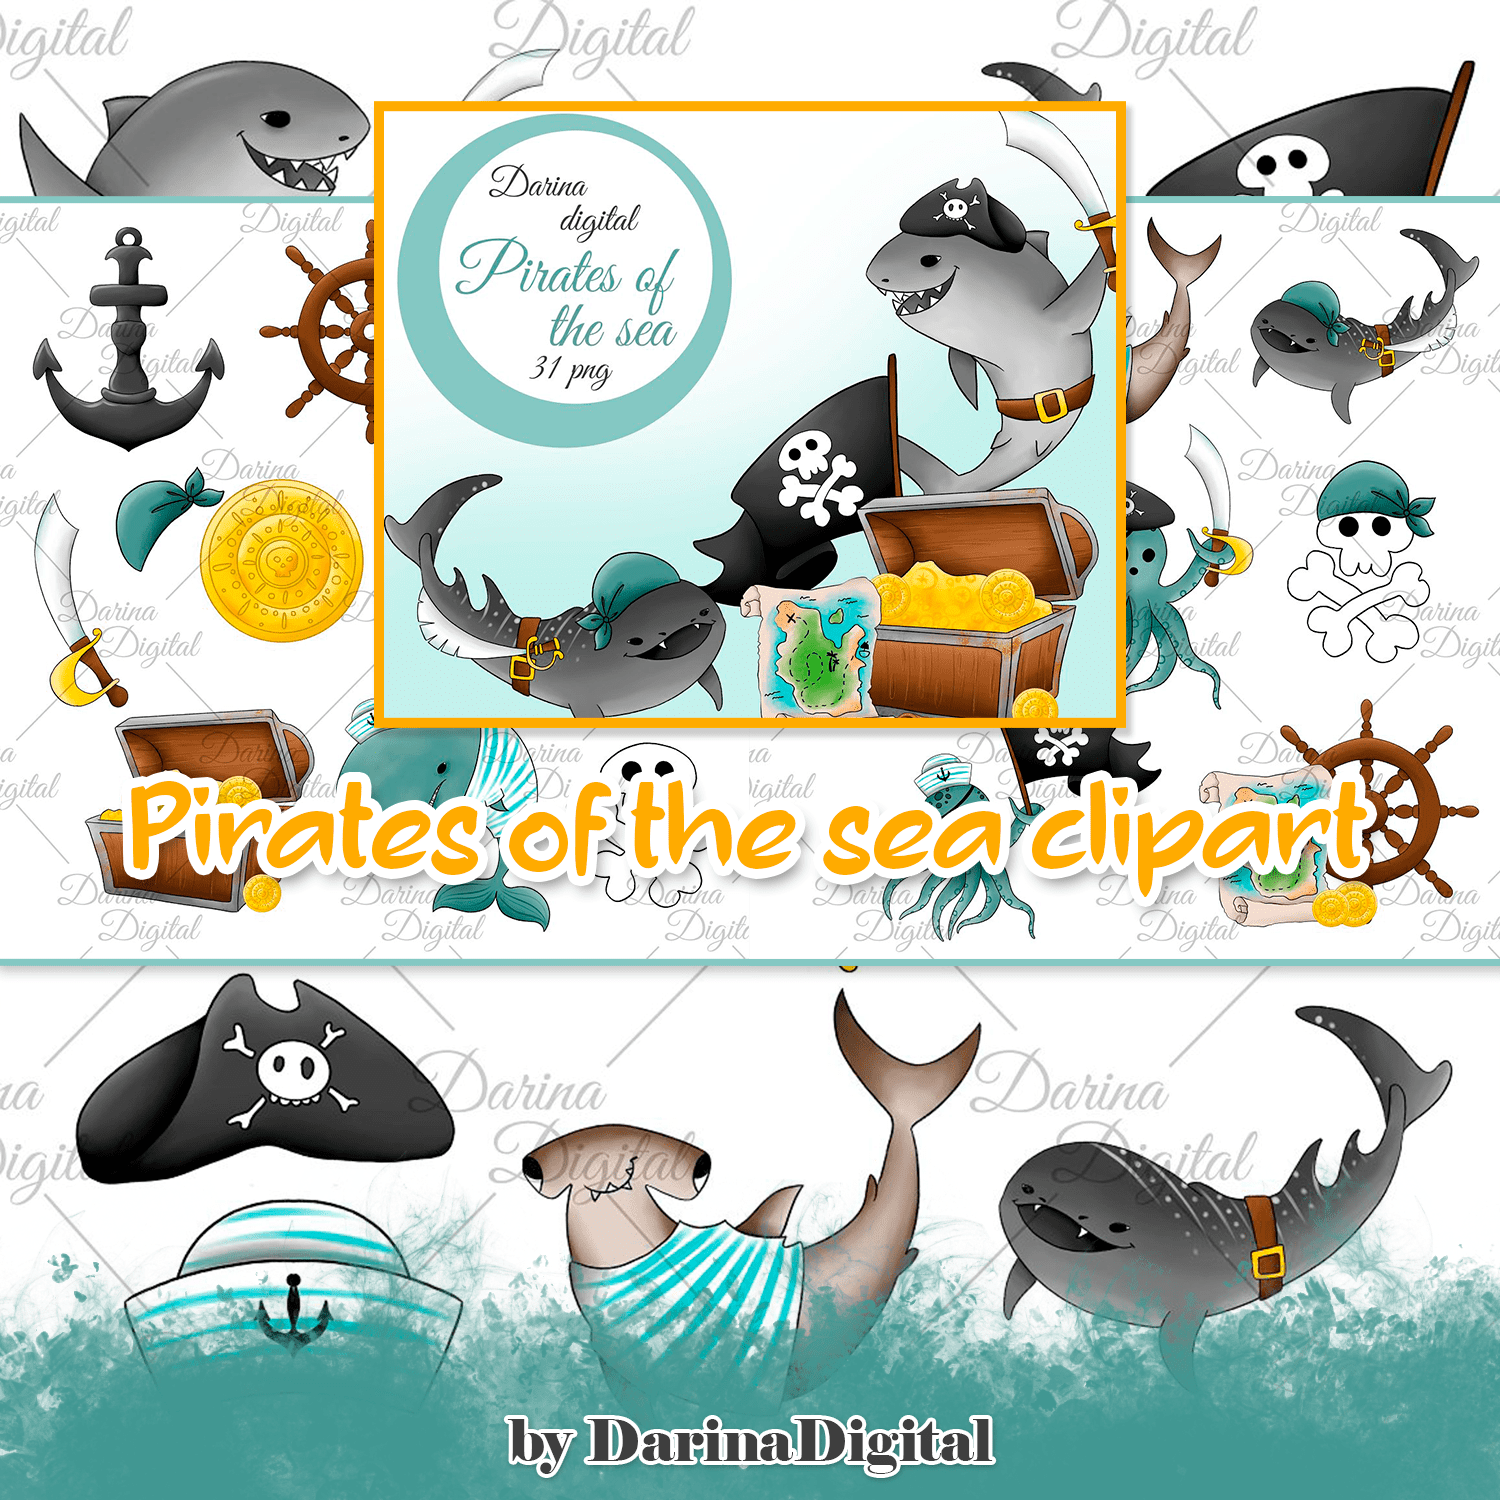 Pirates of the sea clipart cover.